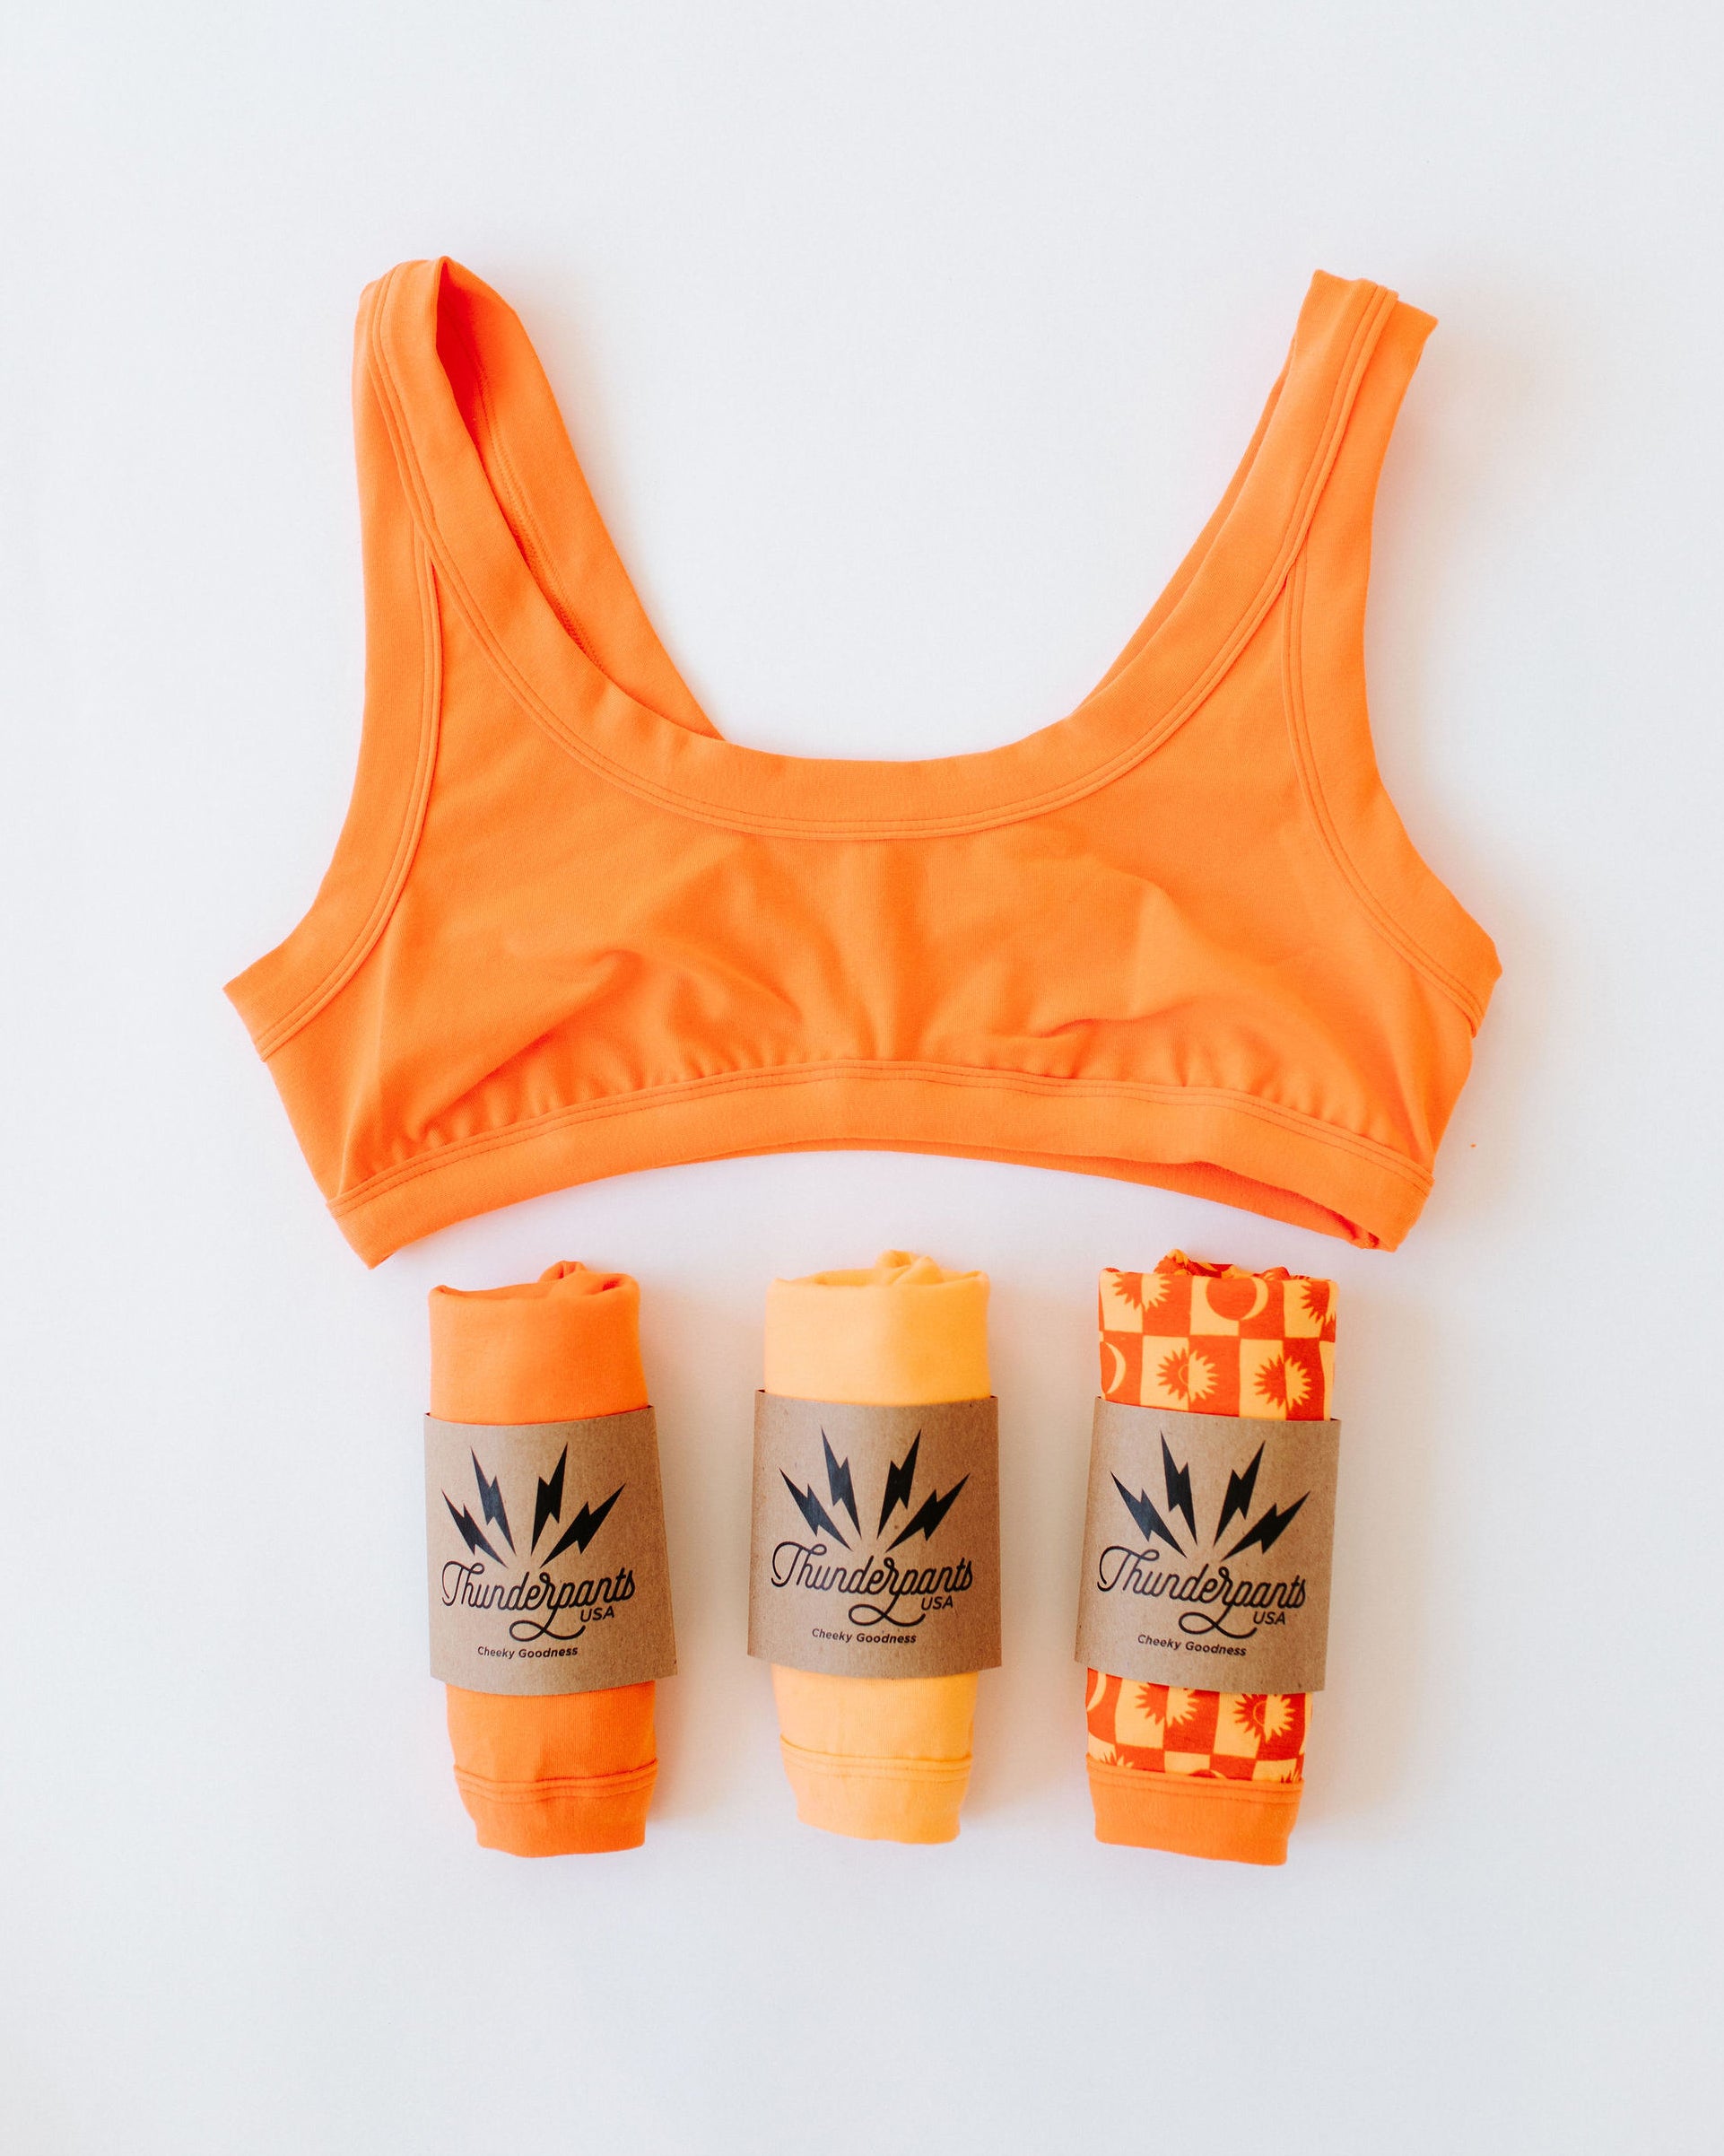 Flat lay of Thunderpants Bralette and three packaged underwear in Oregon Sunstone orange color.